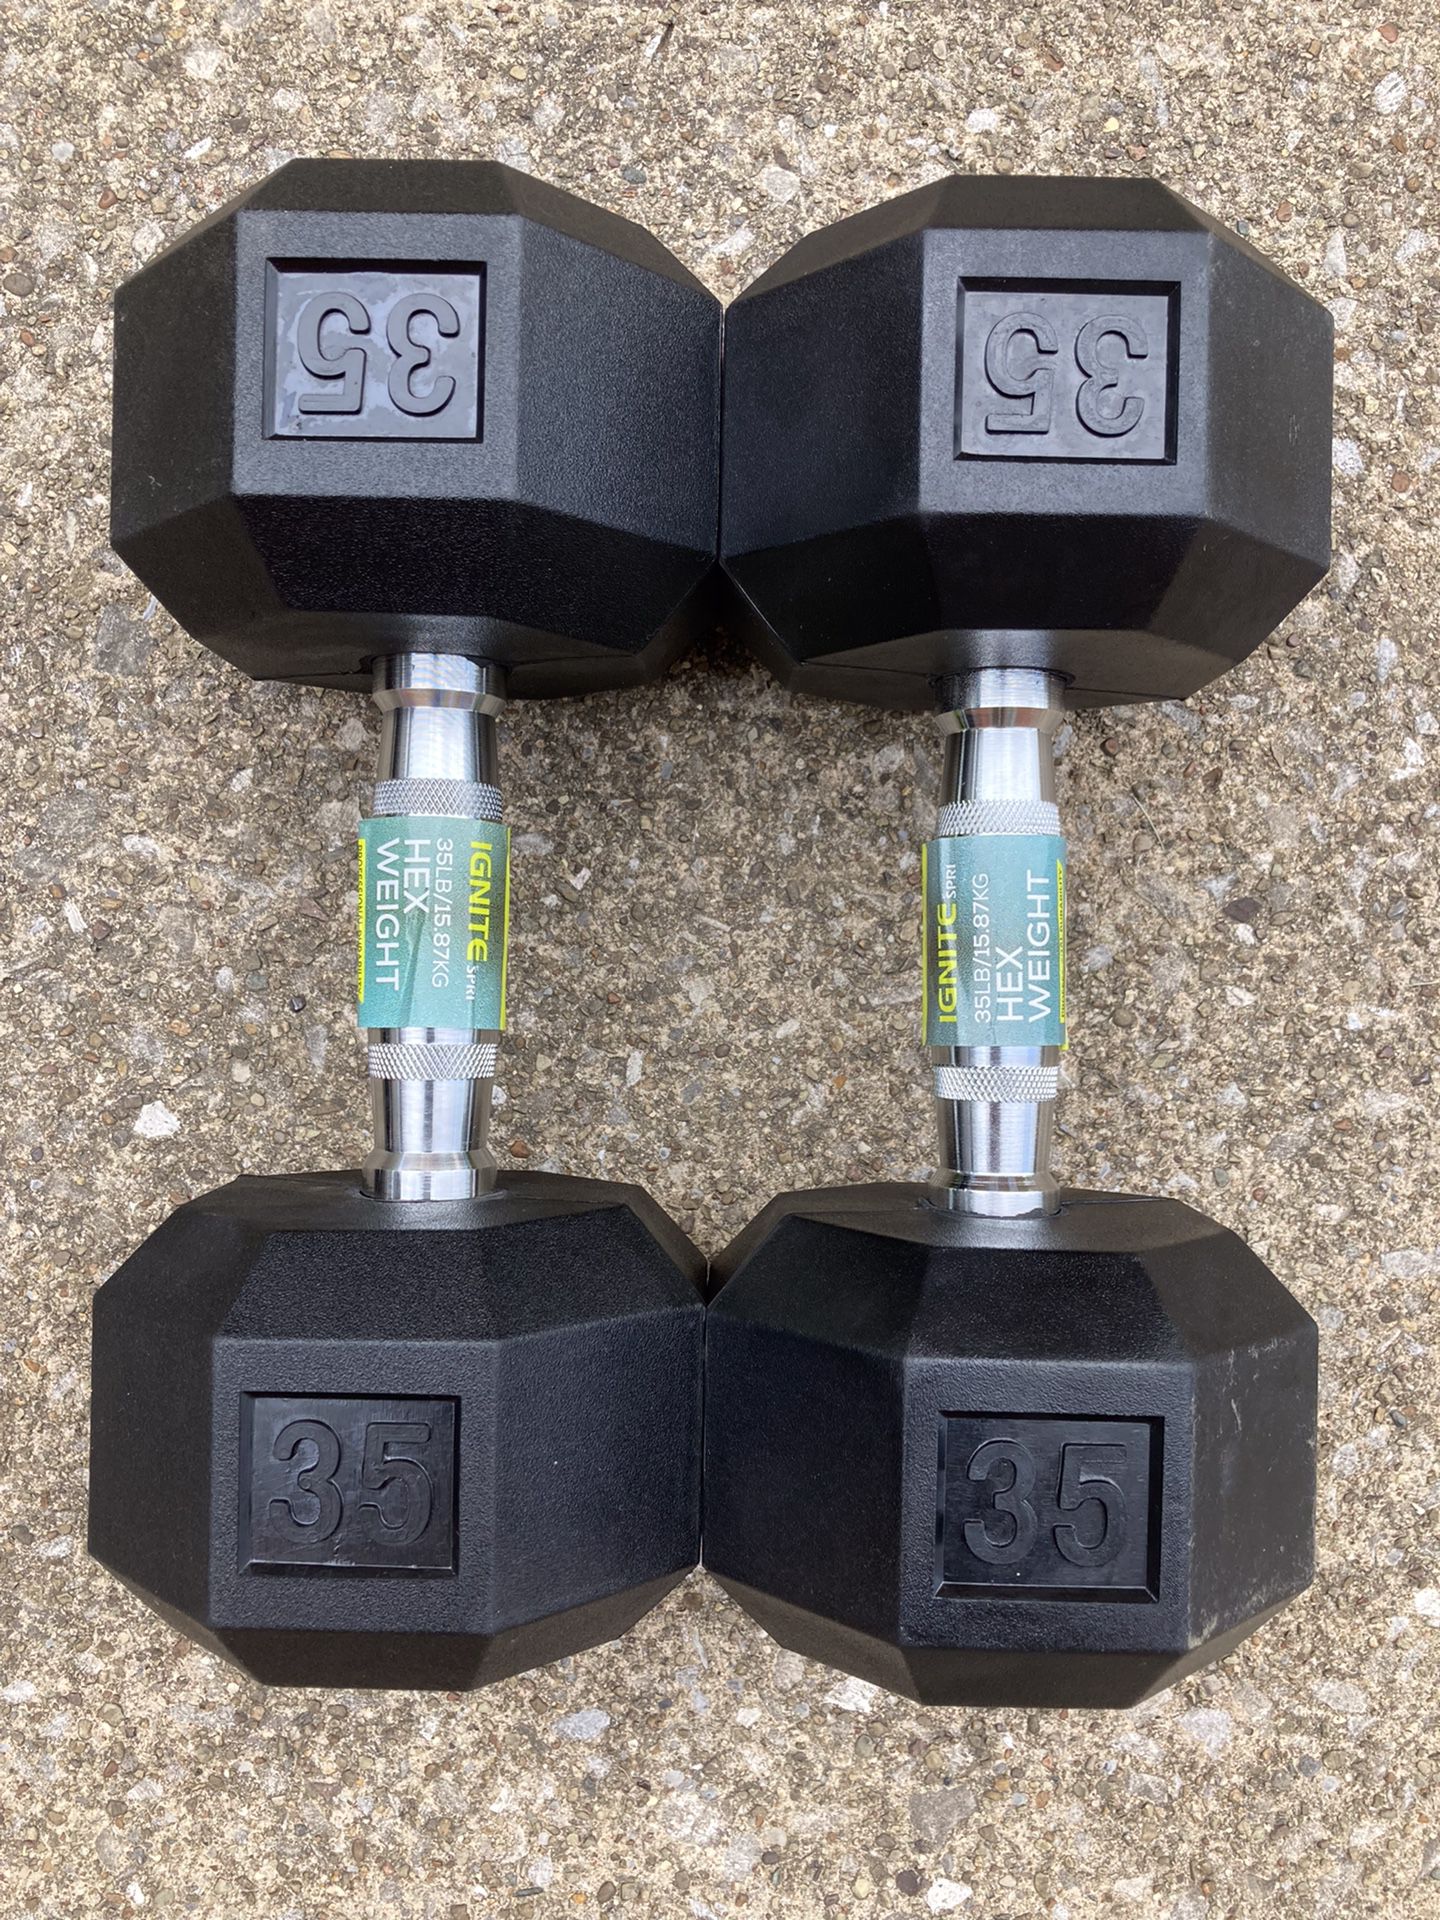 35 lb dumbbells dumbbell set x2 70 lbs total Rubber Hex weights weight 35lb 35lbs 70lb 70lbs pair pounds pound NEW